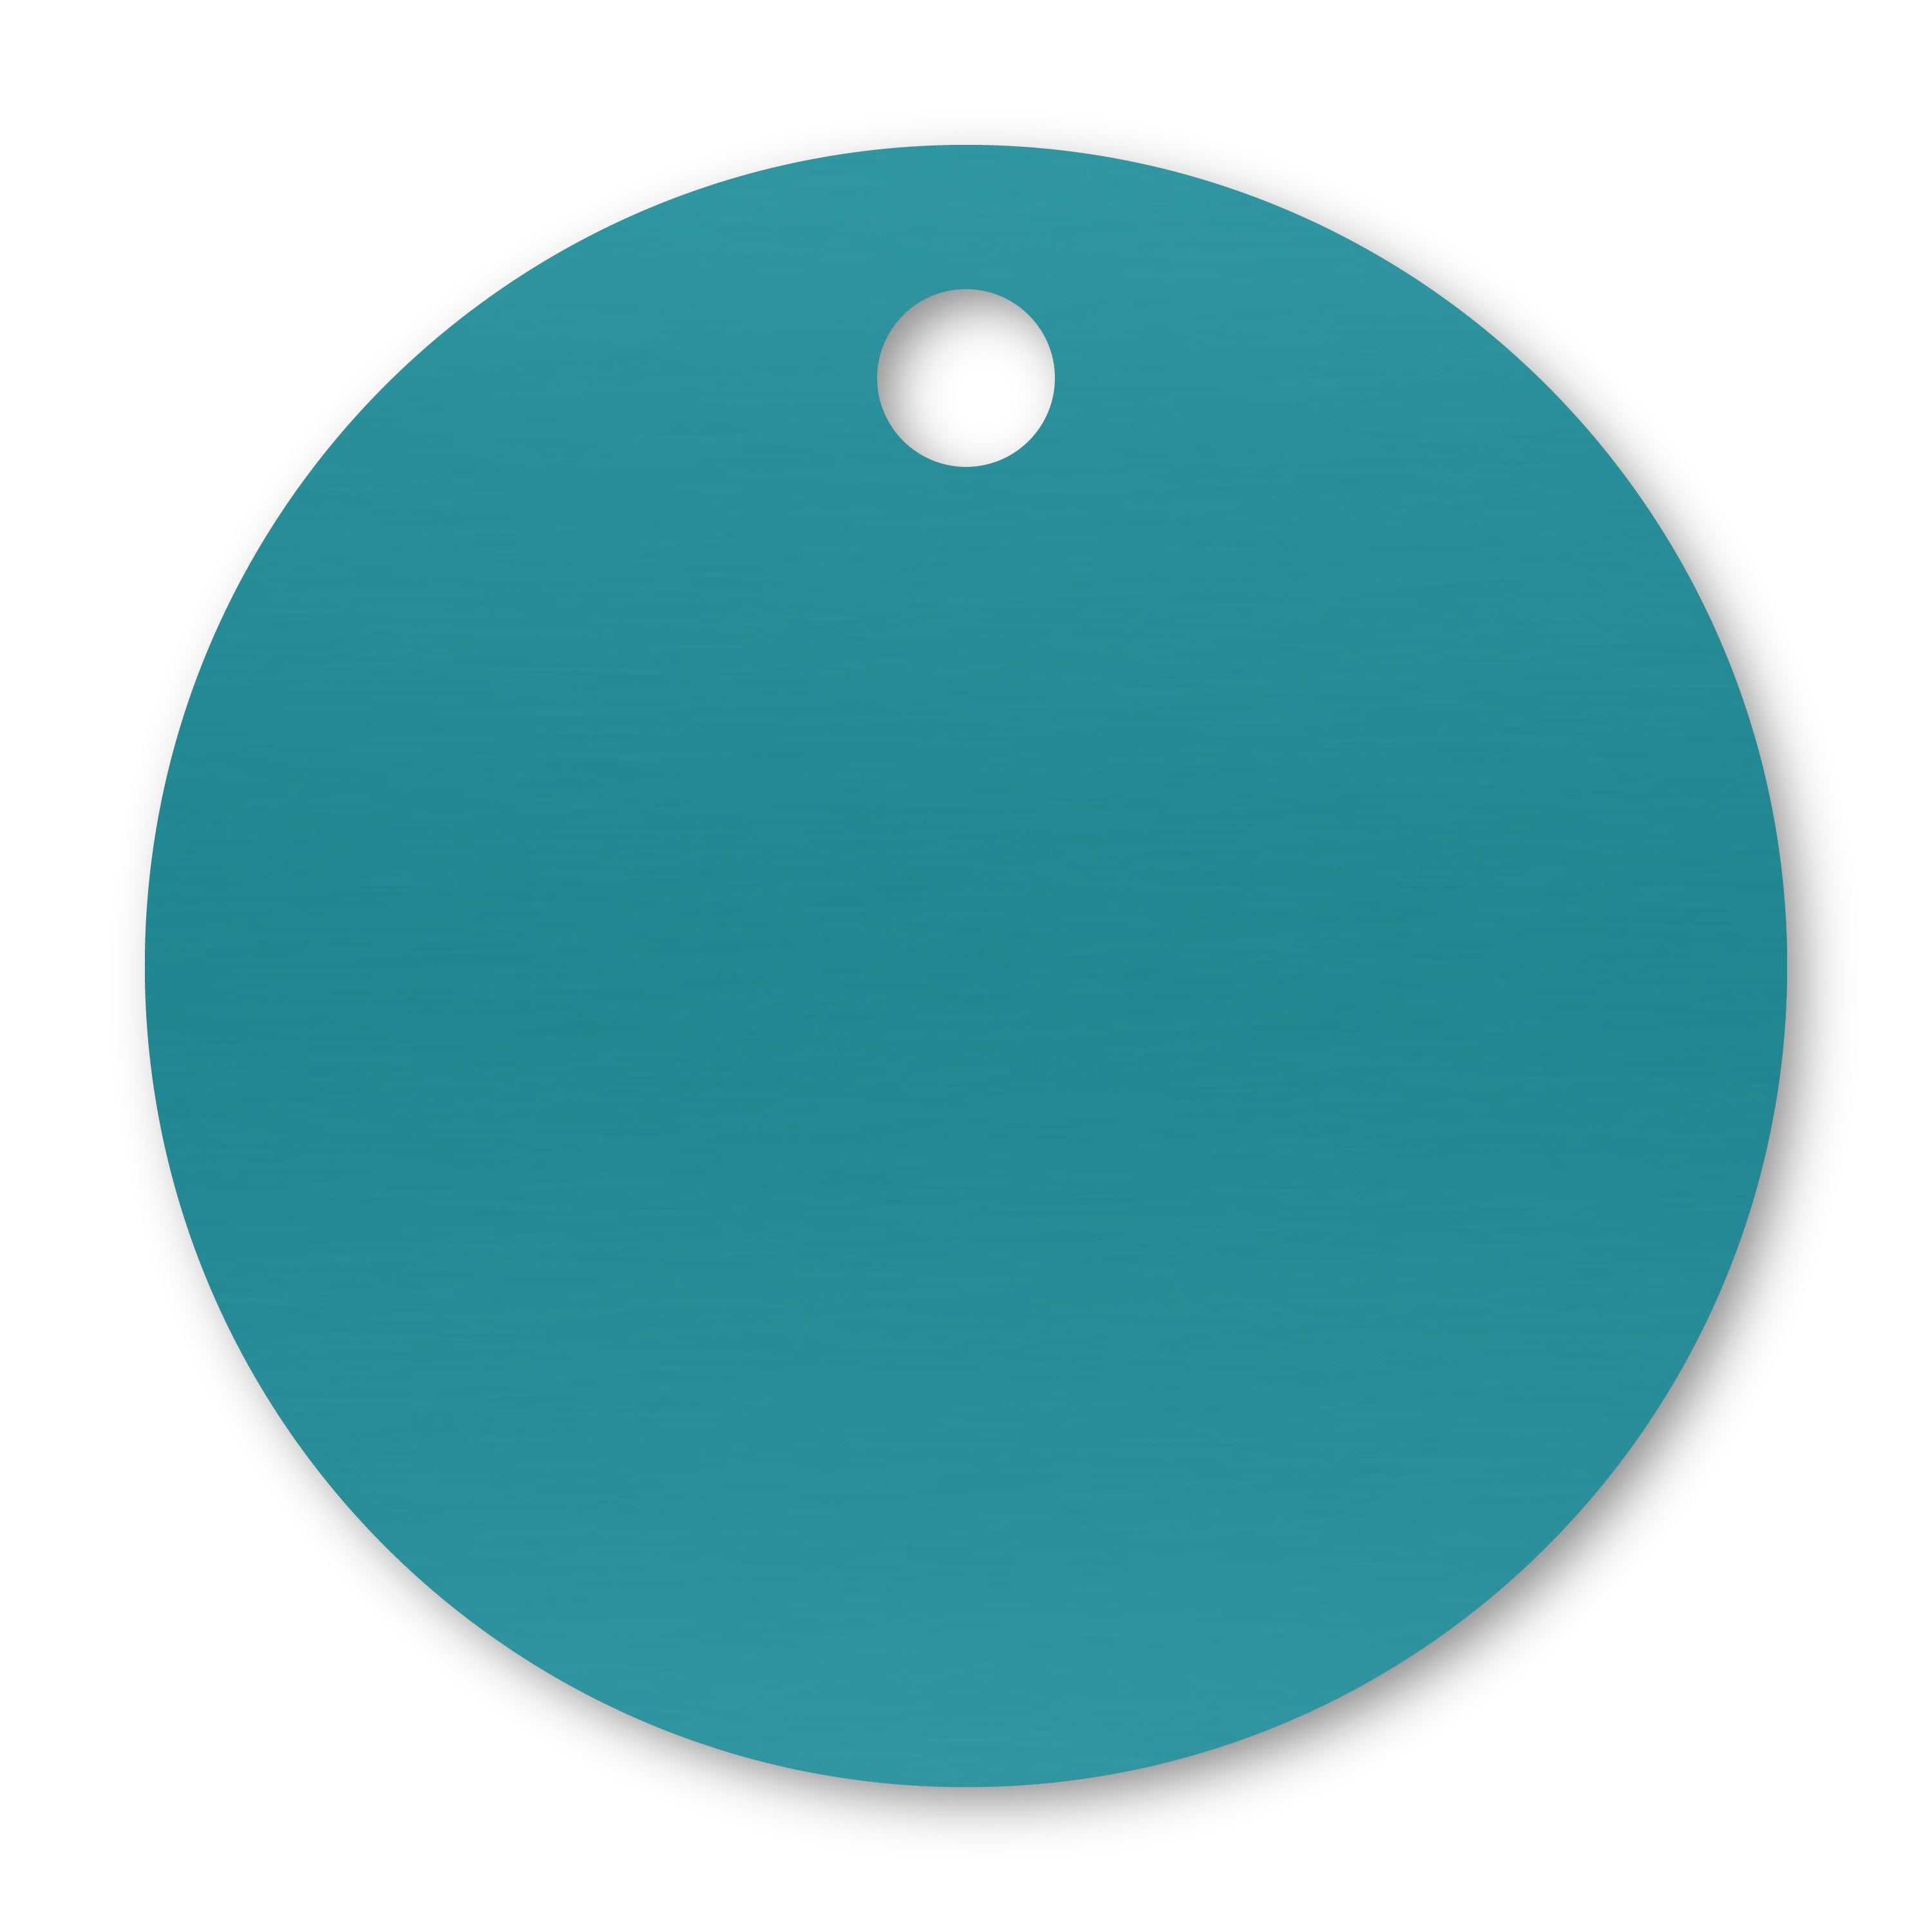 Anodized Aluminum Round Tags, 7/8" with 3/32" Hole, Laser Engraved Metal Tags Craftworks NW Turquoise 